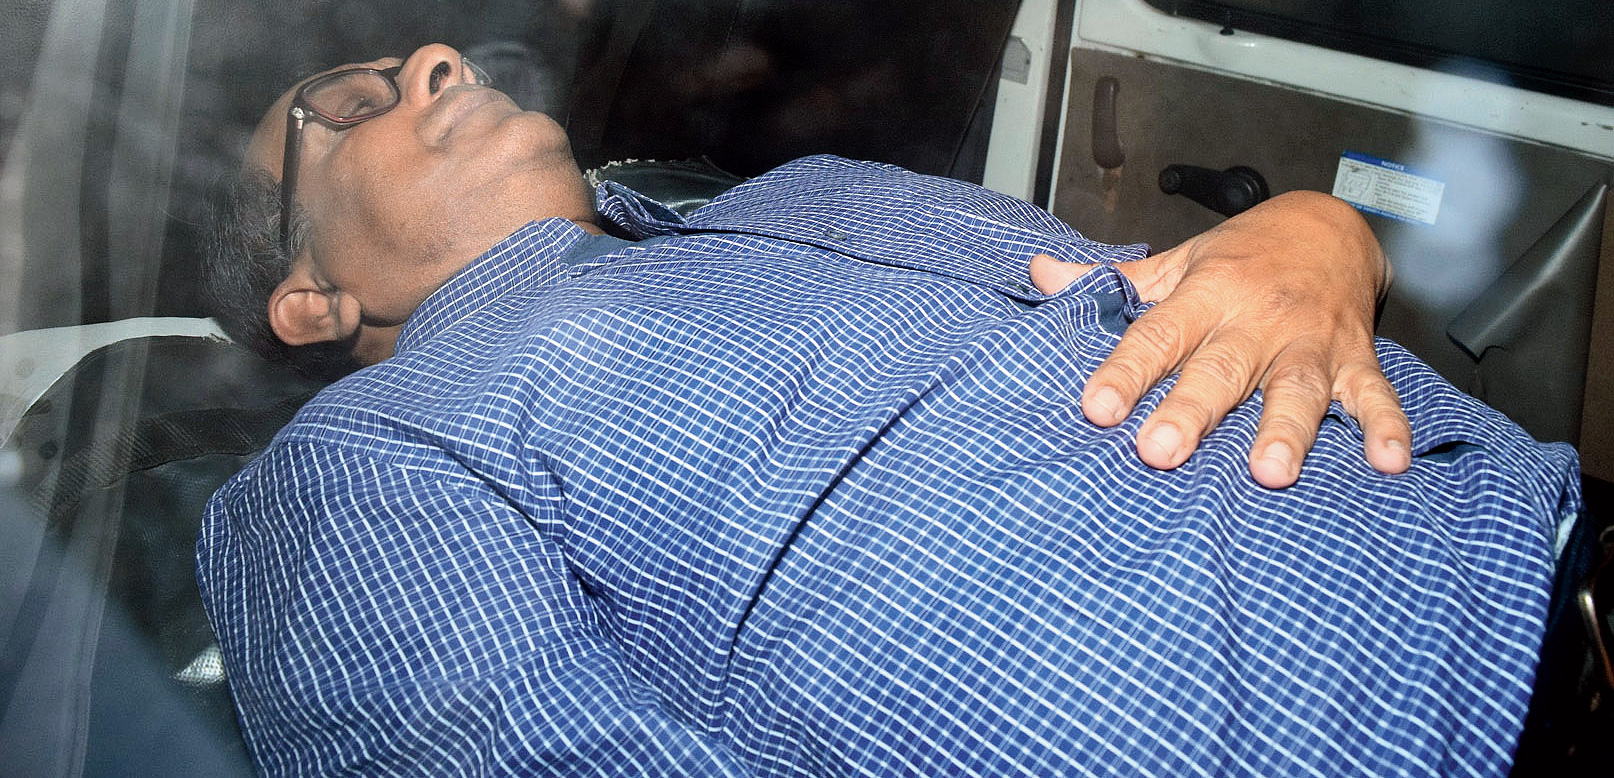 Suranjan Das, vice-chancellor of Jadavpur University, being taken to AMRI Dhakuria after being allegedly assaulted during a scuffle involving two groups of students on the campus on Tuesday.
